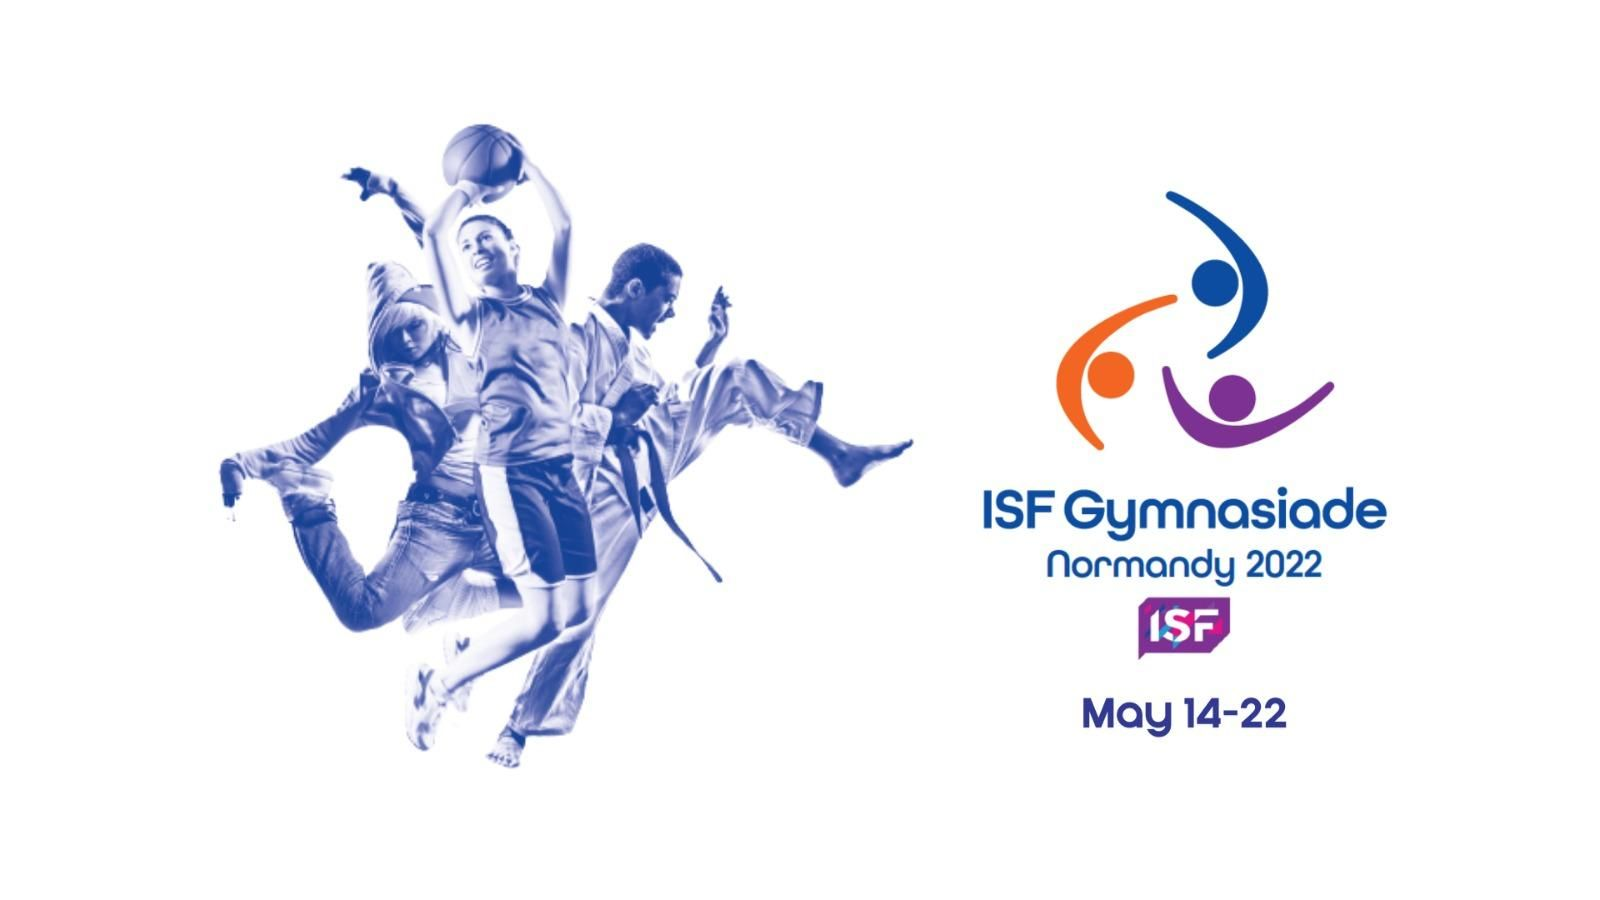 France and Brazil finish joint-top of ISF Gymnasiade Normandy 2022 medals table